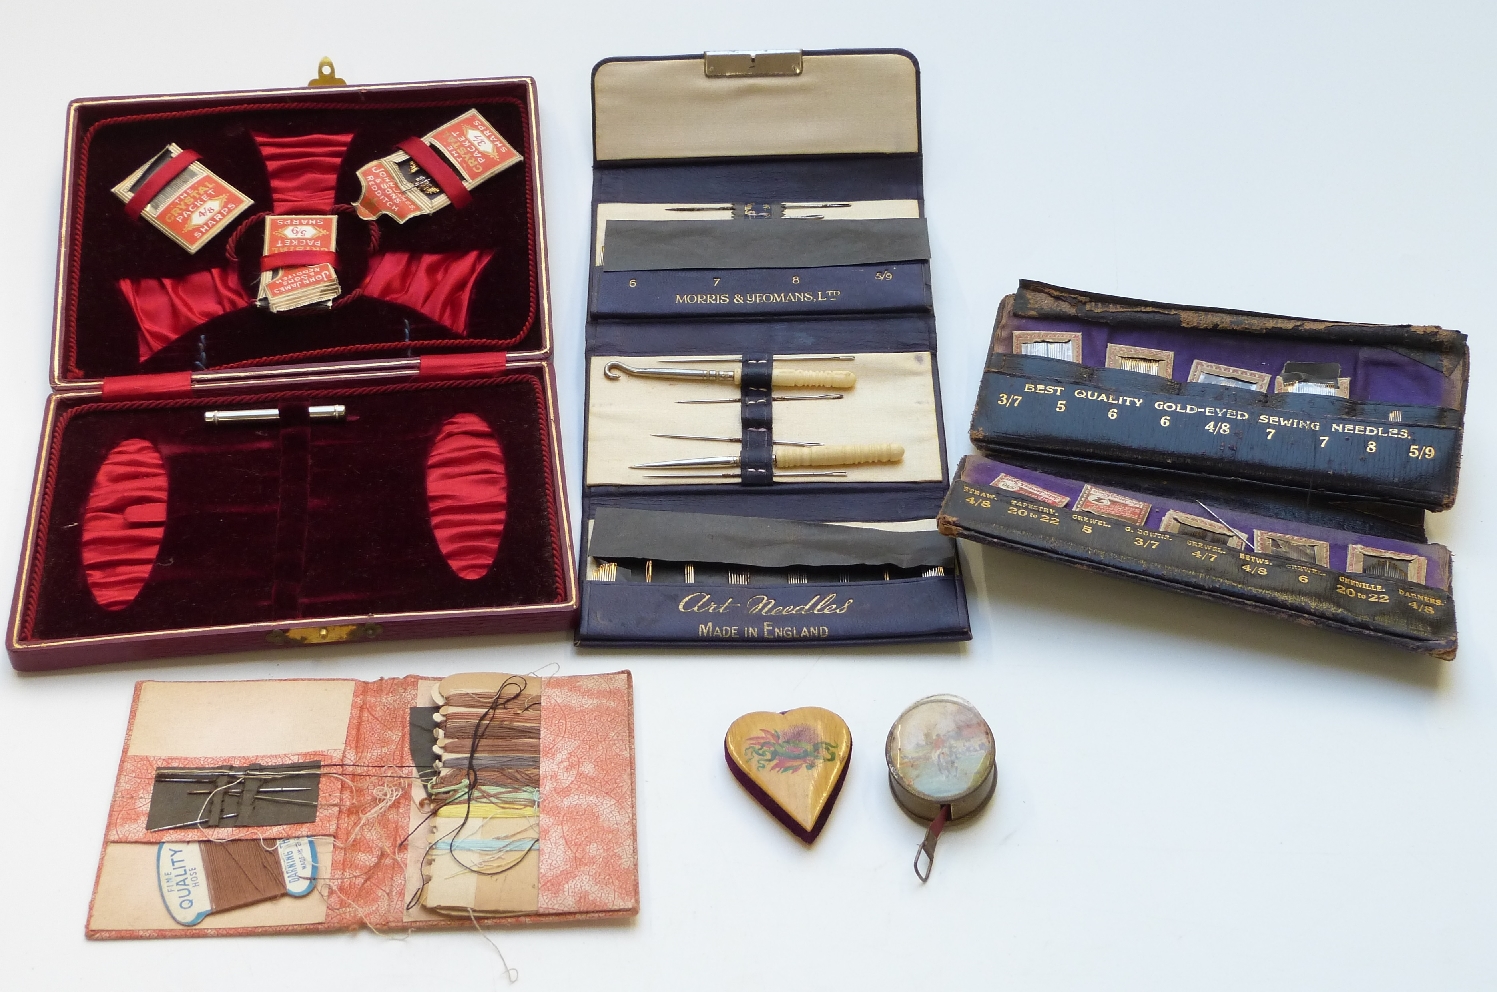 A collection of needlework / sewing items including several leather needle cases with some